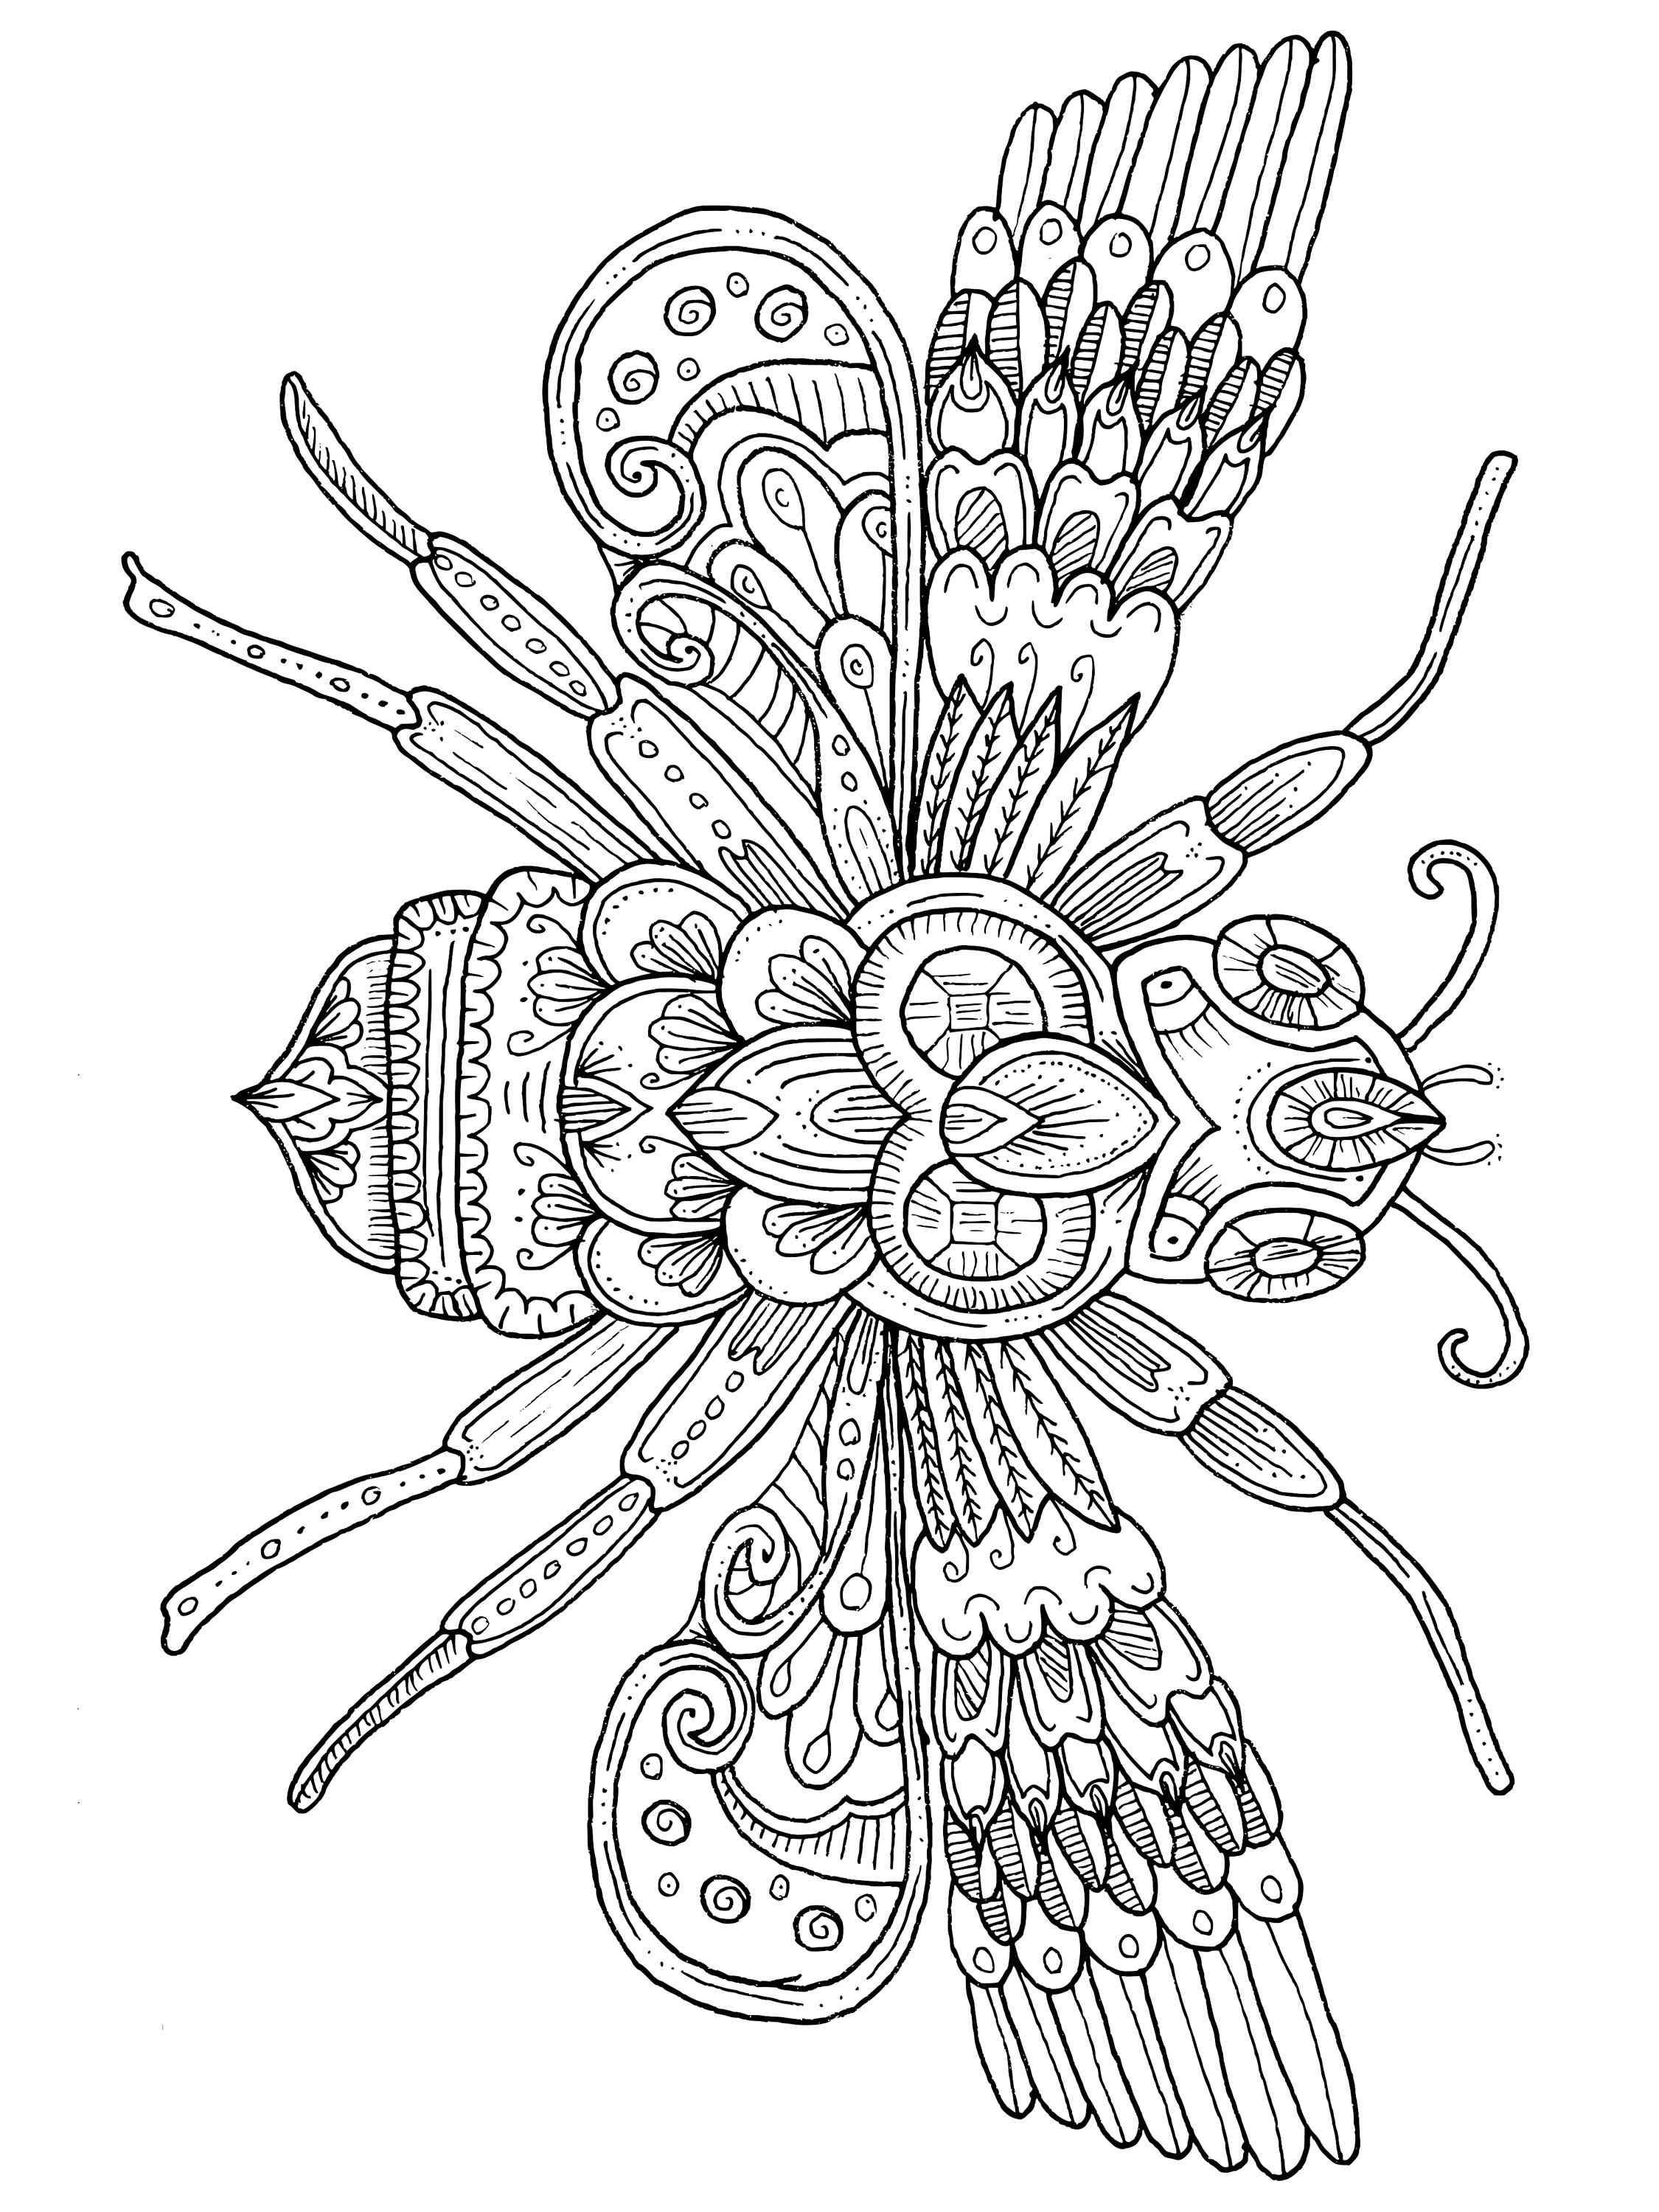 https://coloringsense.com/images/Insect/Bee/Bee-coloring-pages-for-Adults-1.jpg